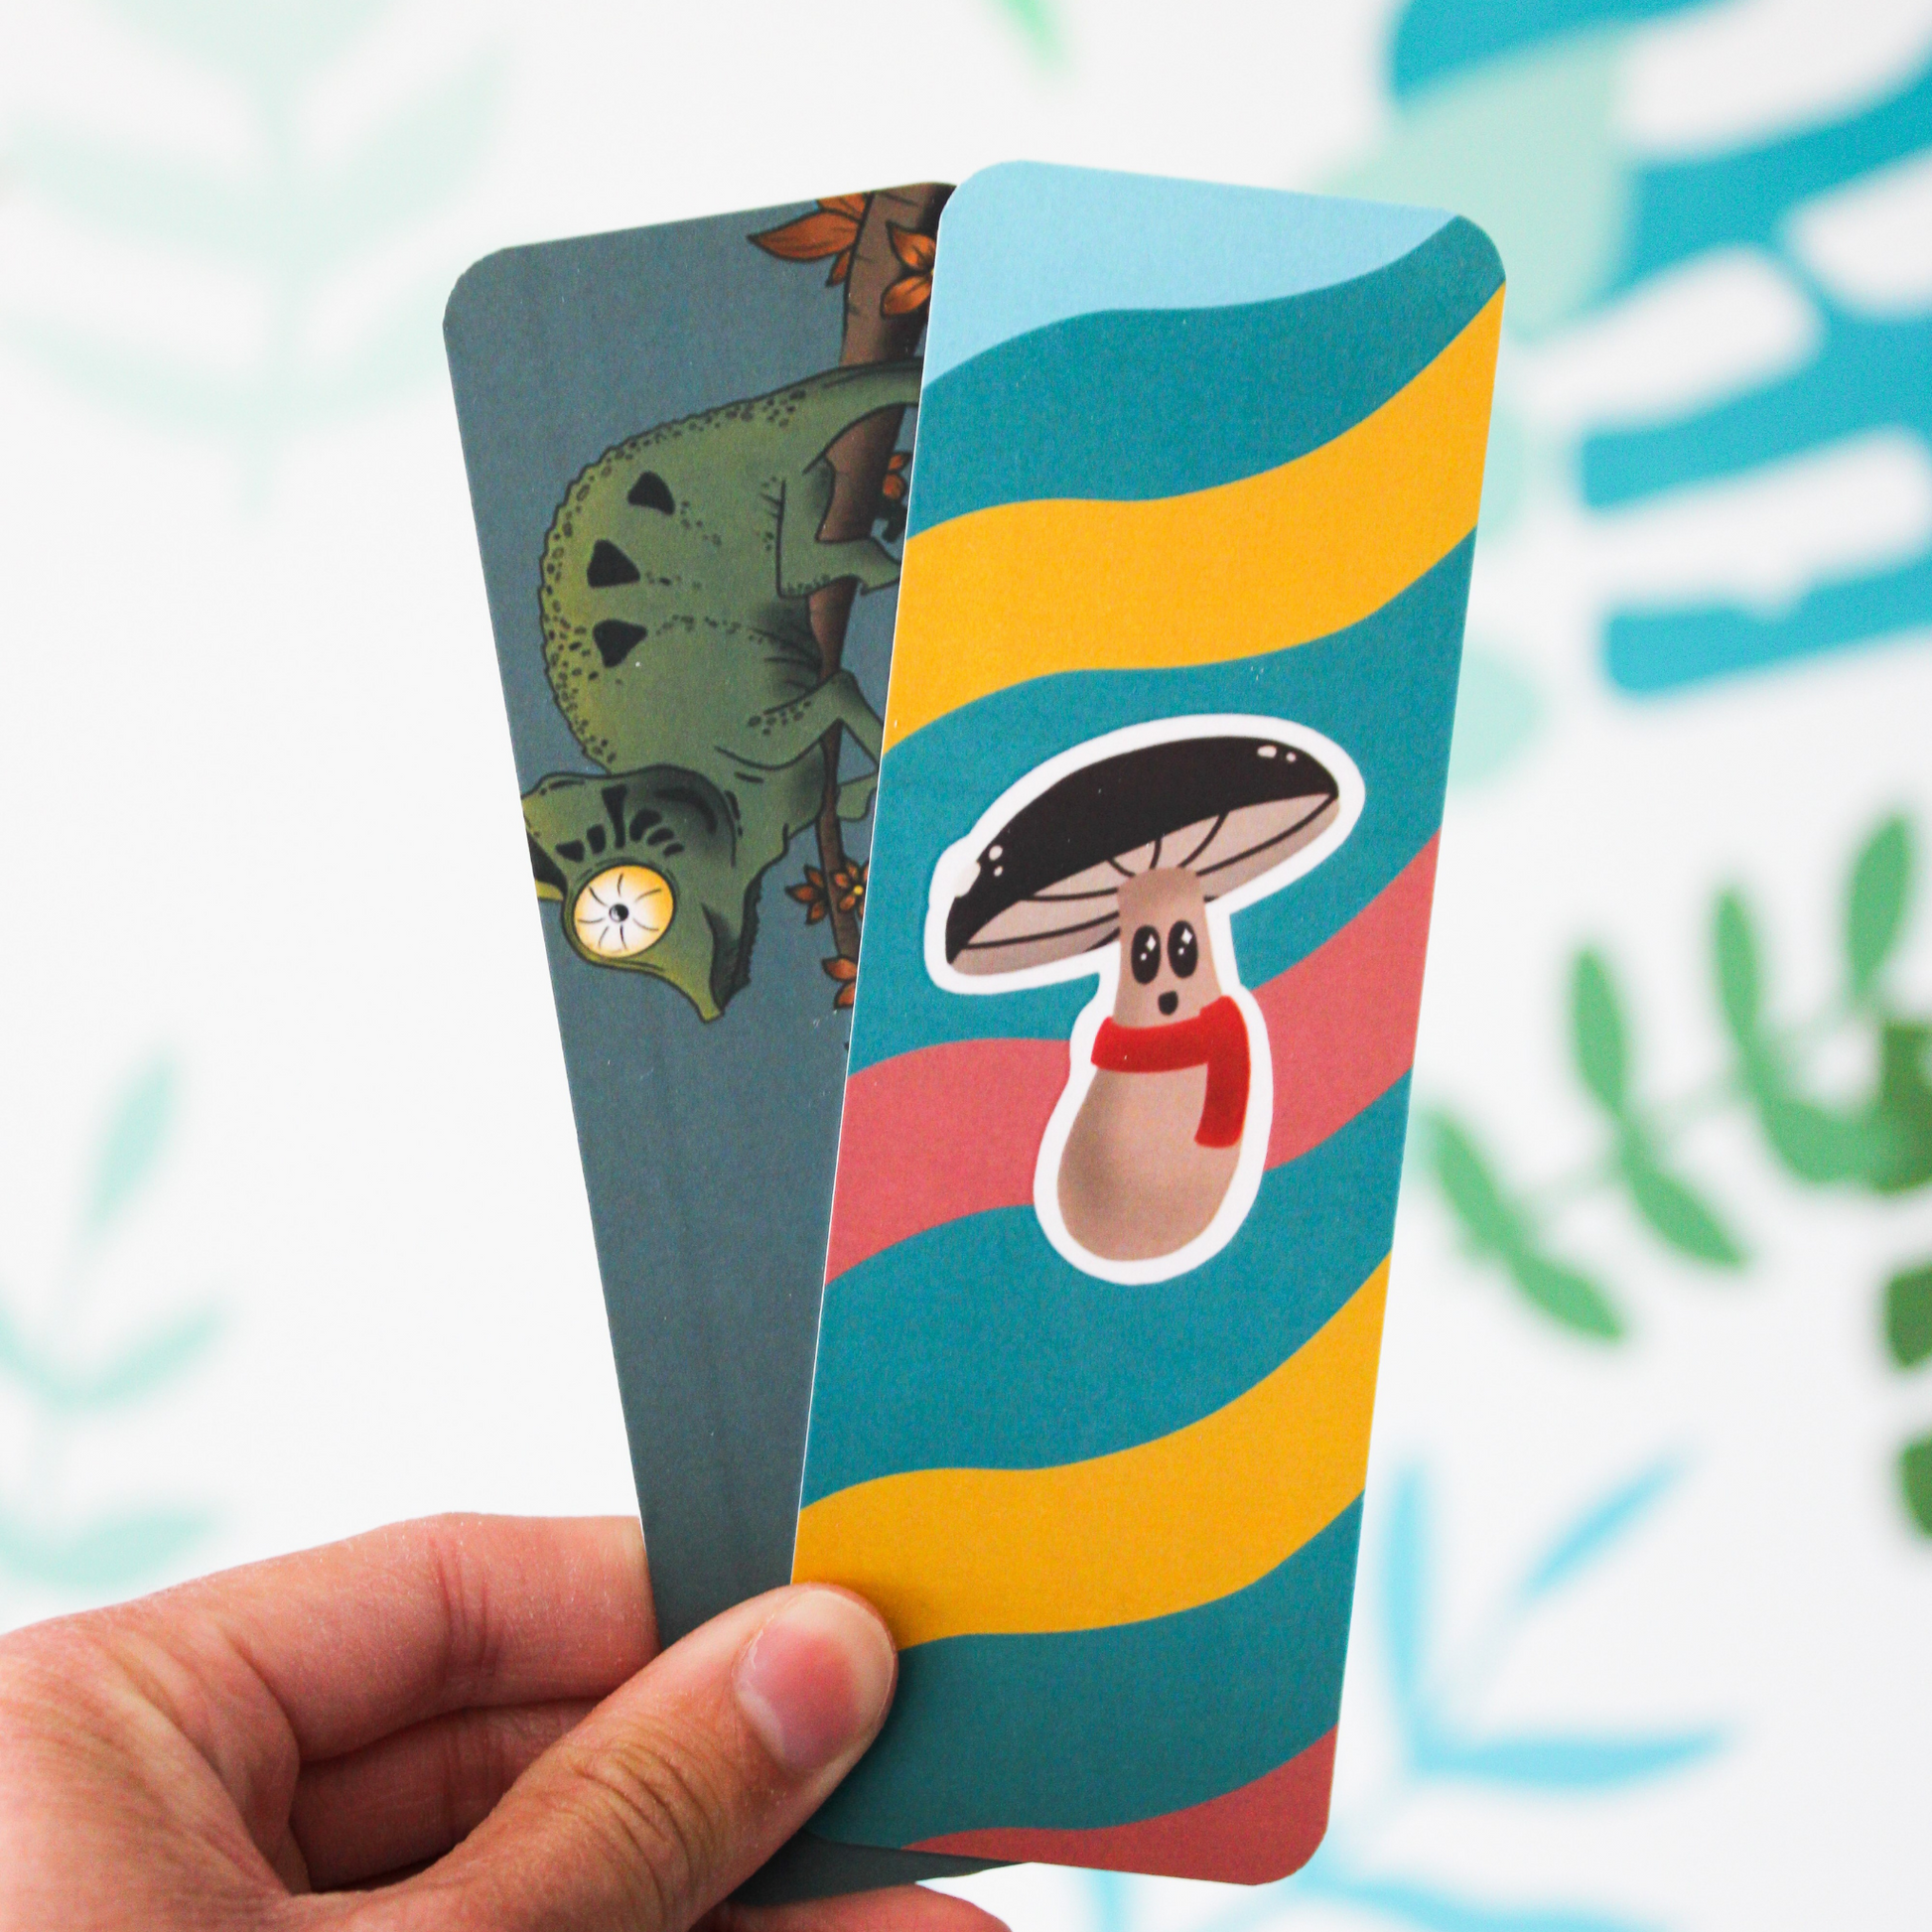 A hand holding the chameleon and groovy Moosh Jr bookmark together. The background is a blurred leaf pattern.